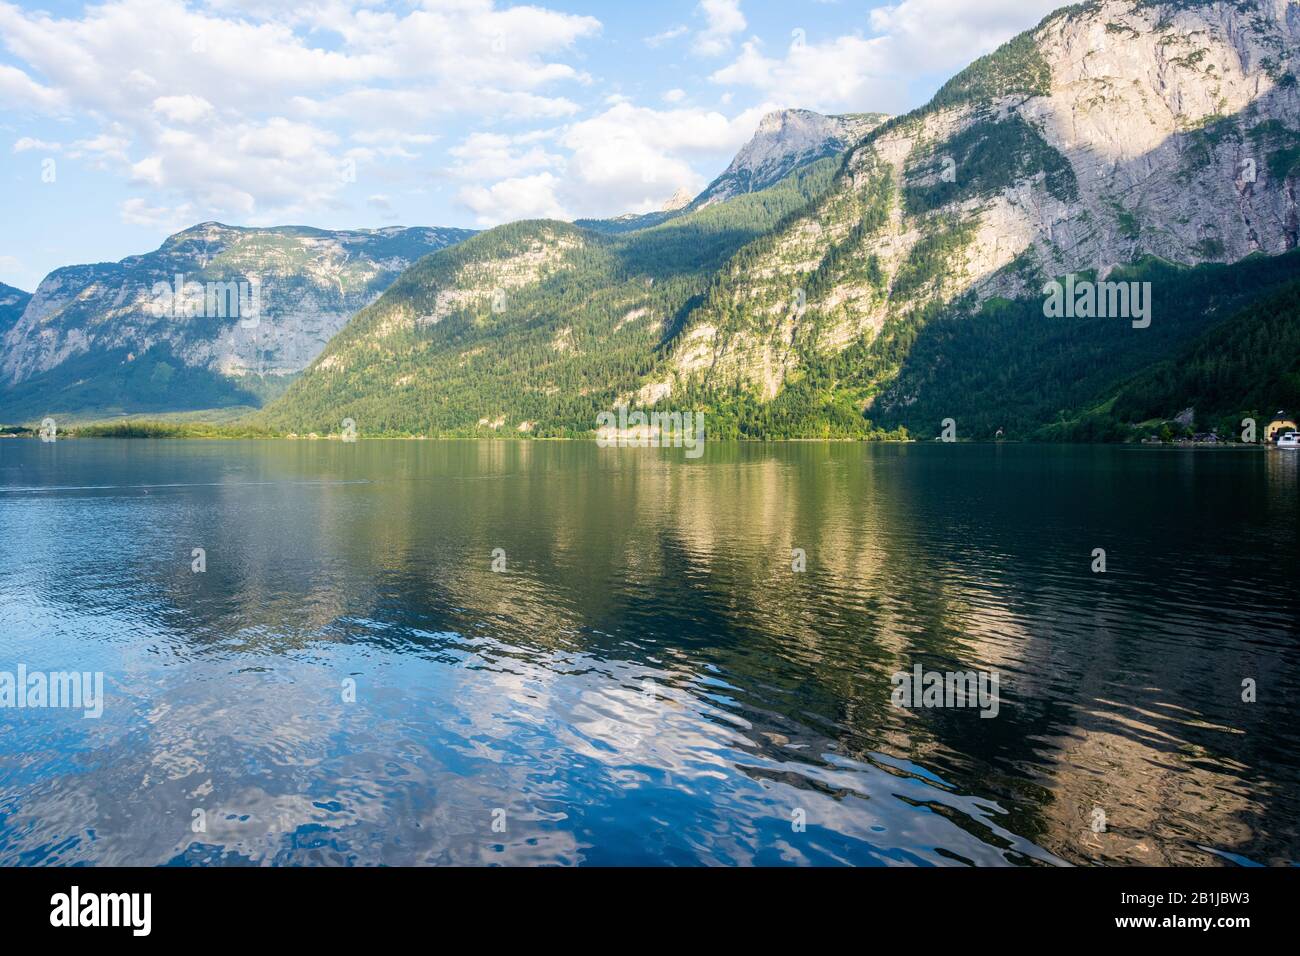 Crystal clear waters of Hallstatter See lake in Austria, with mountains in the background. Stock Photo